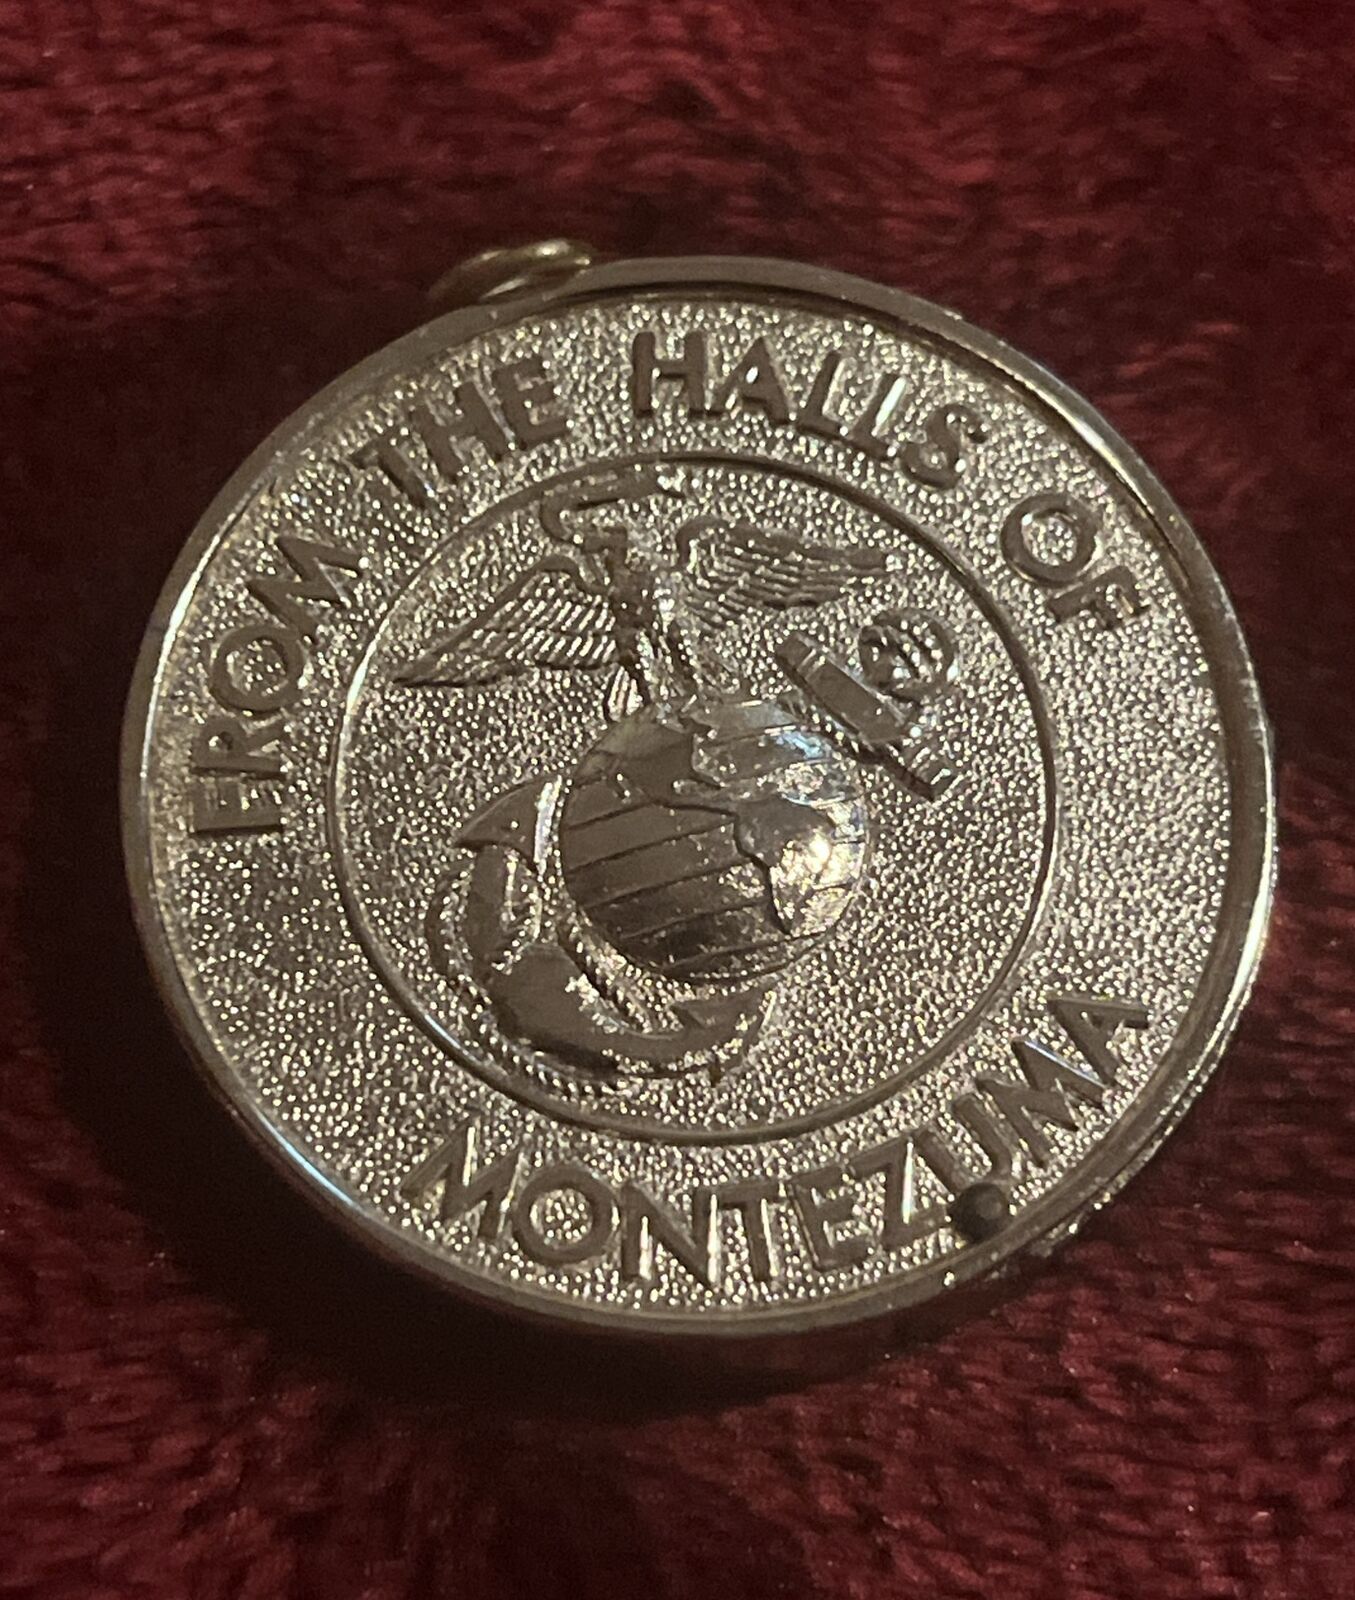 U.S. MARINES CORPS 1775 VINTAGE COIN SHAPED LIGHTER